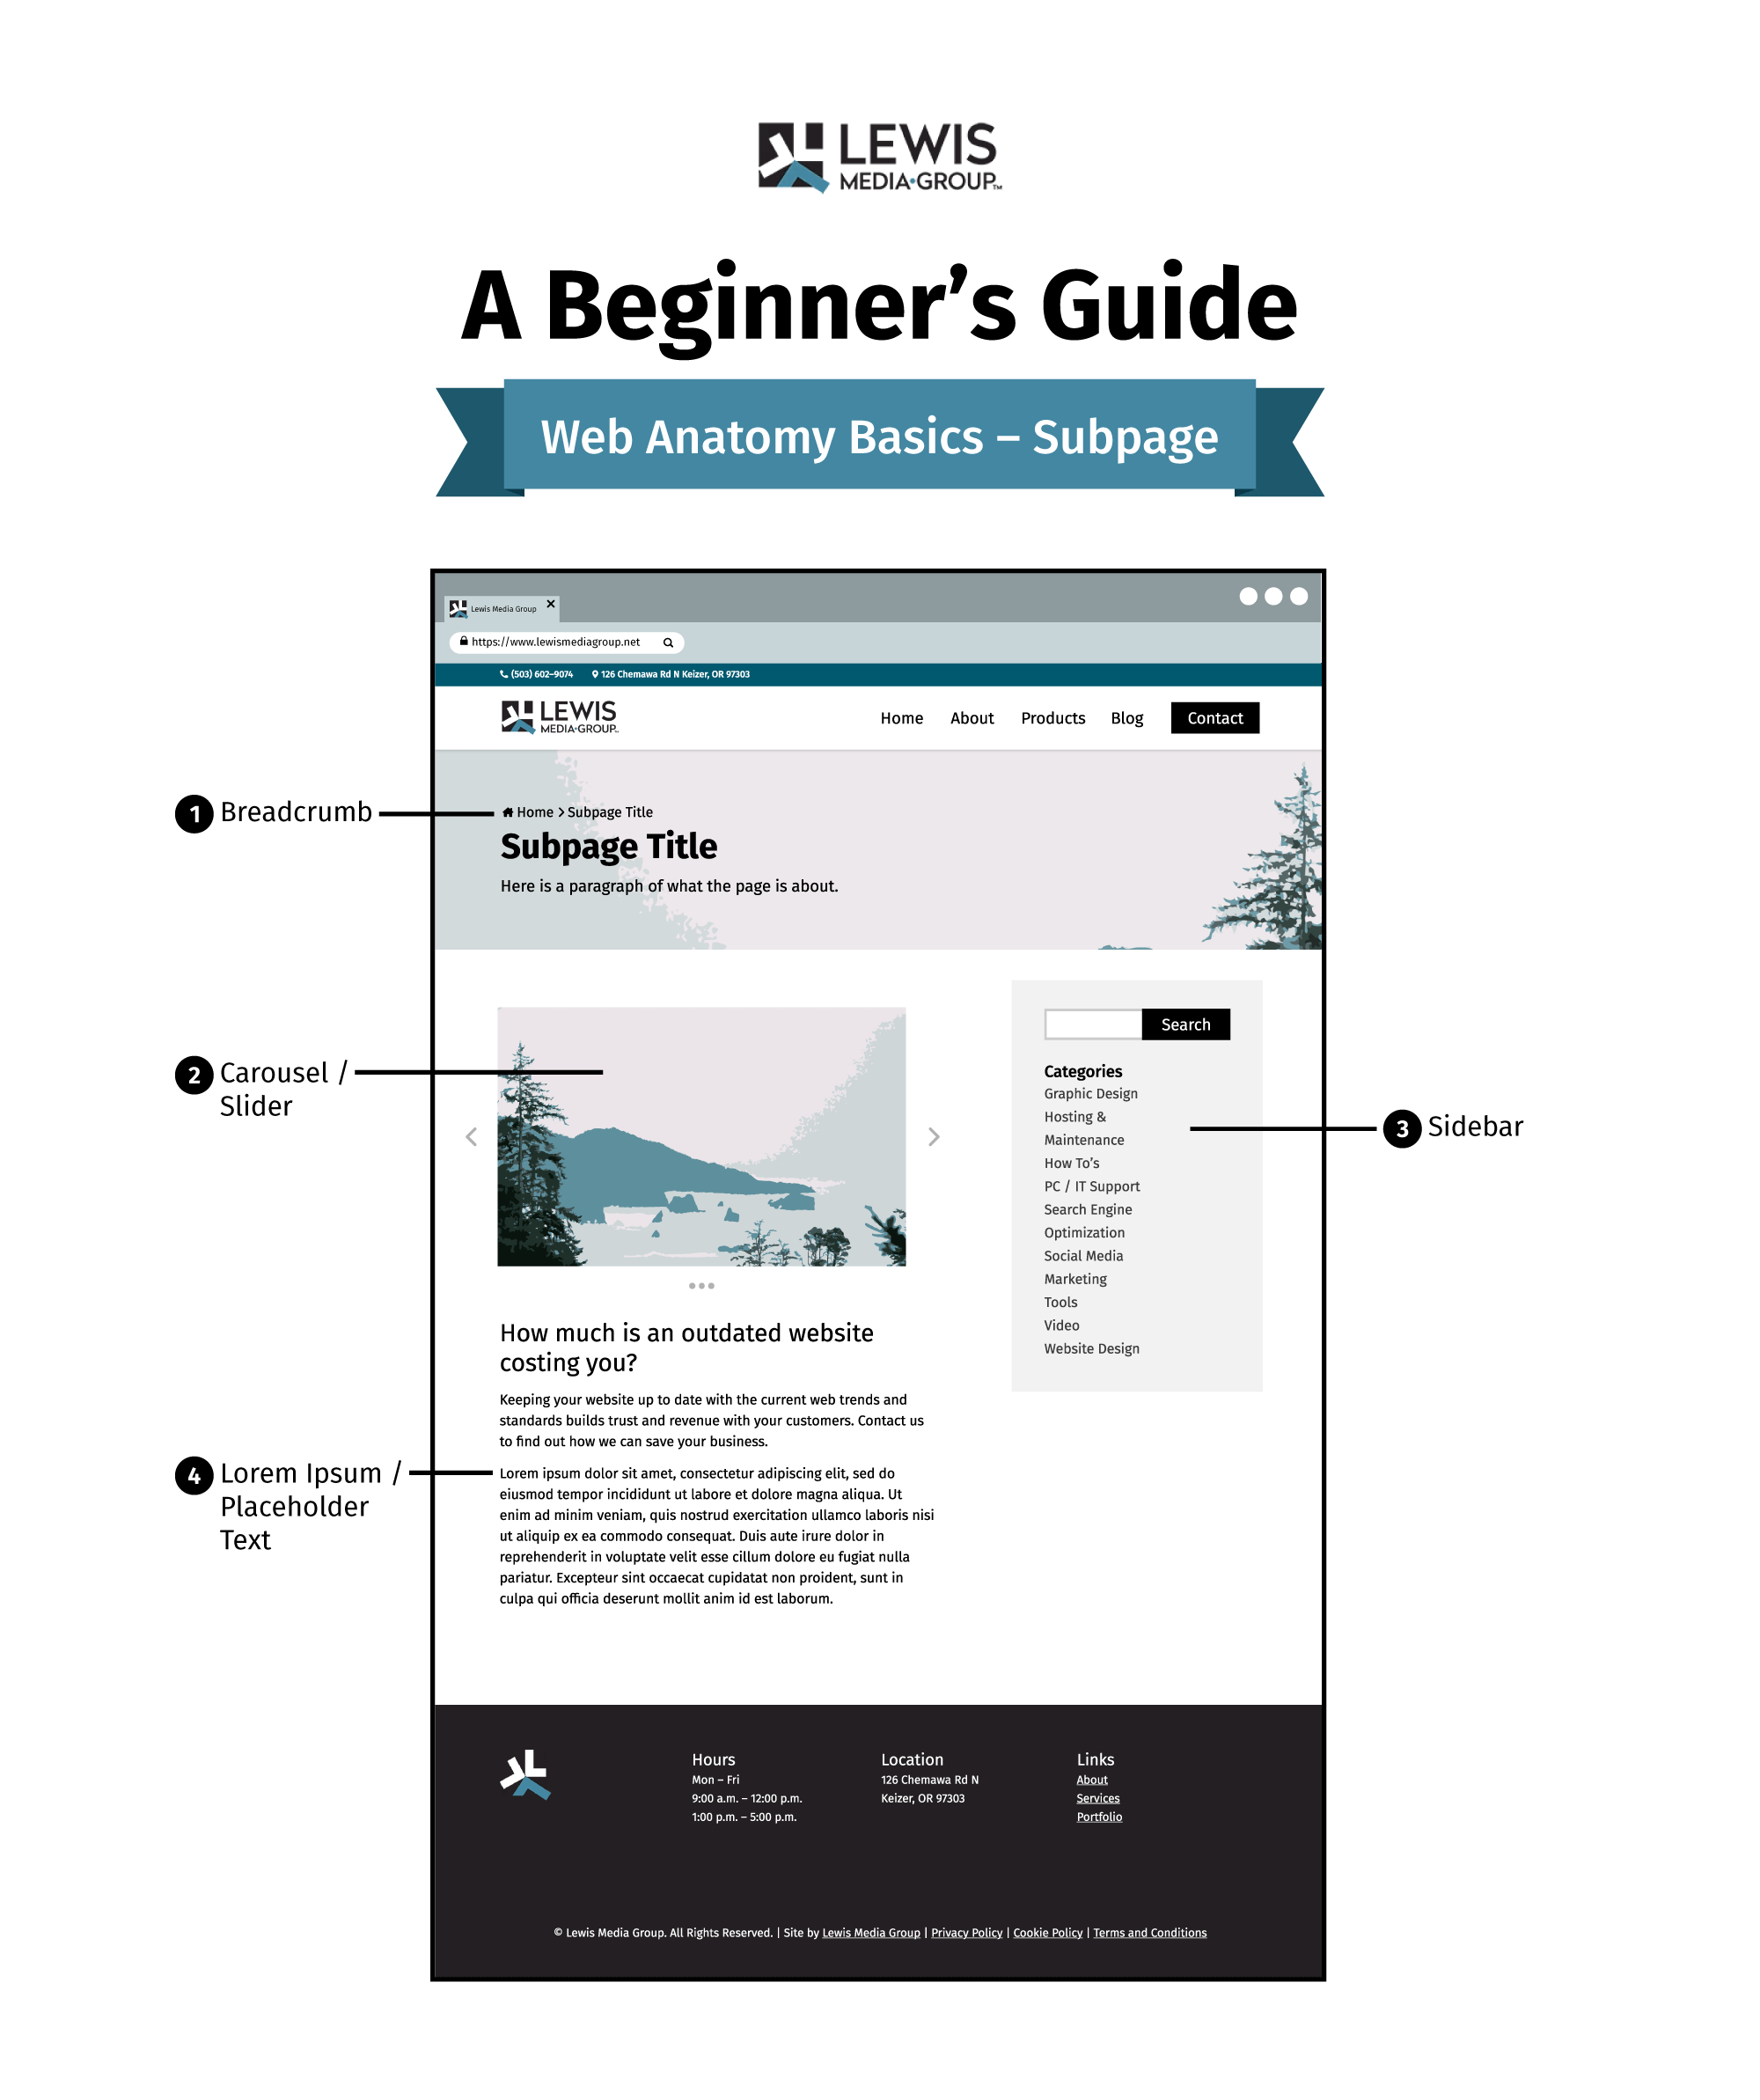 A beginner's guide to web anatomy basics - subpage with labels for what part of the page is what term